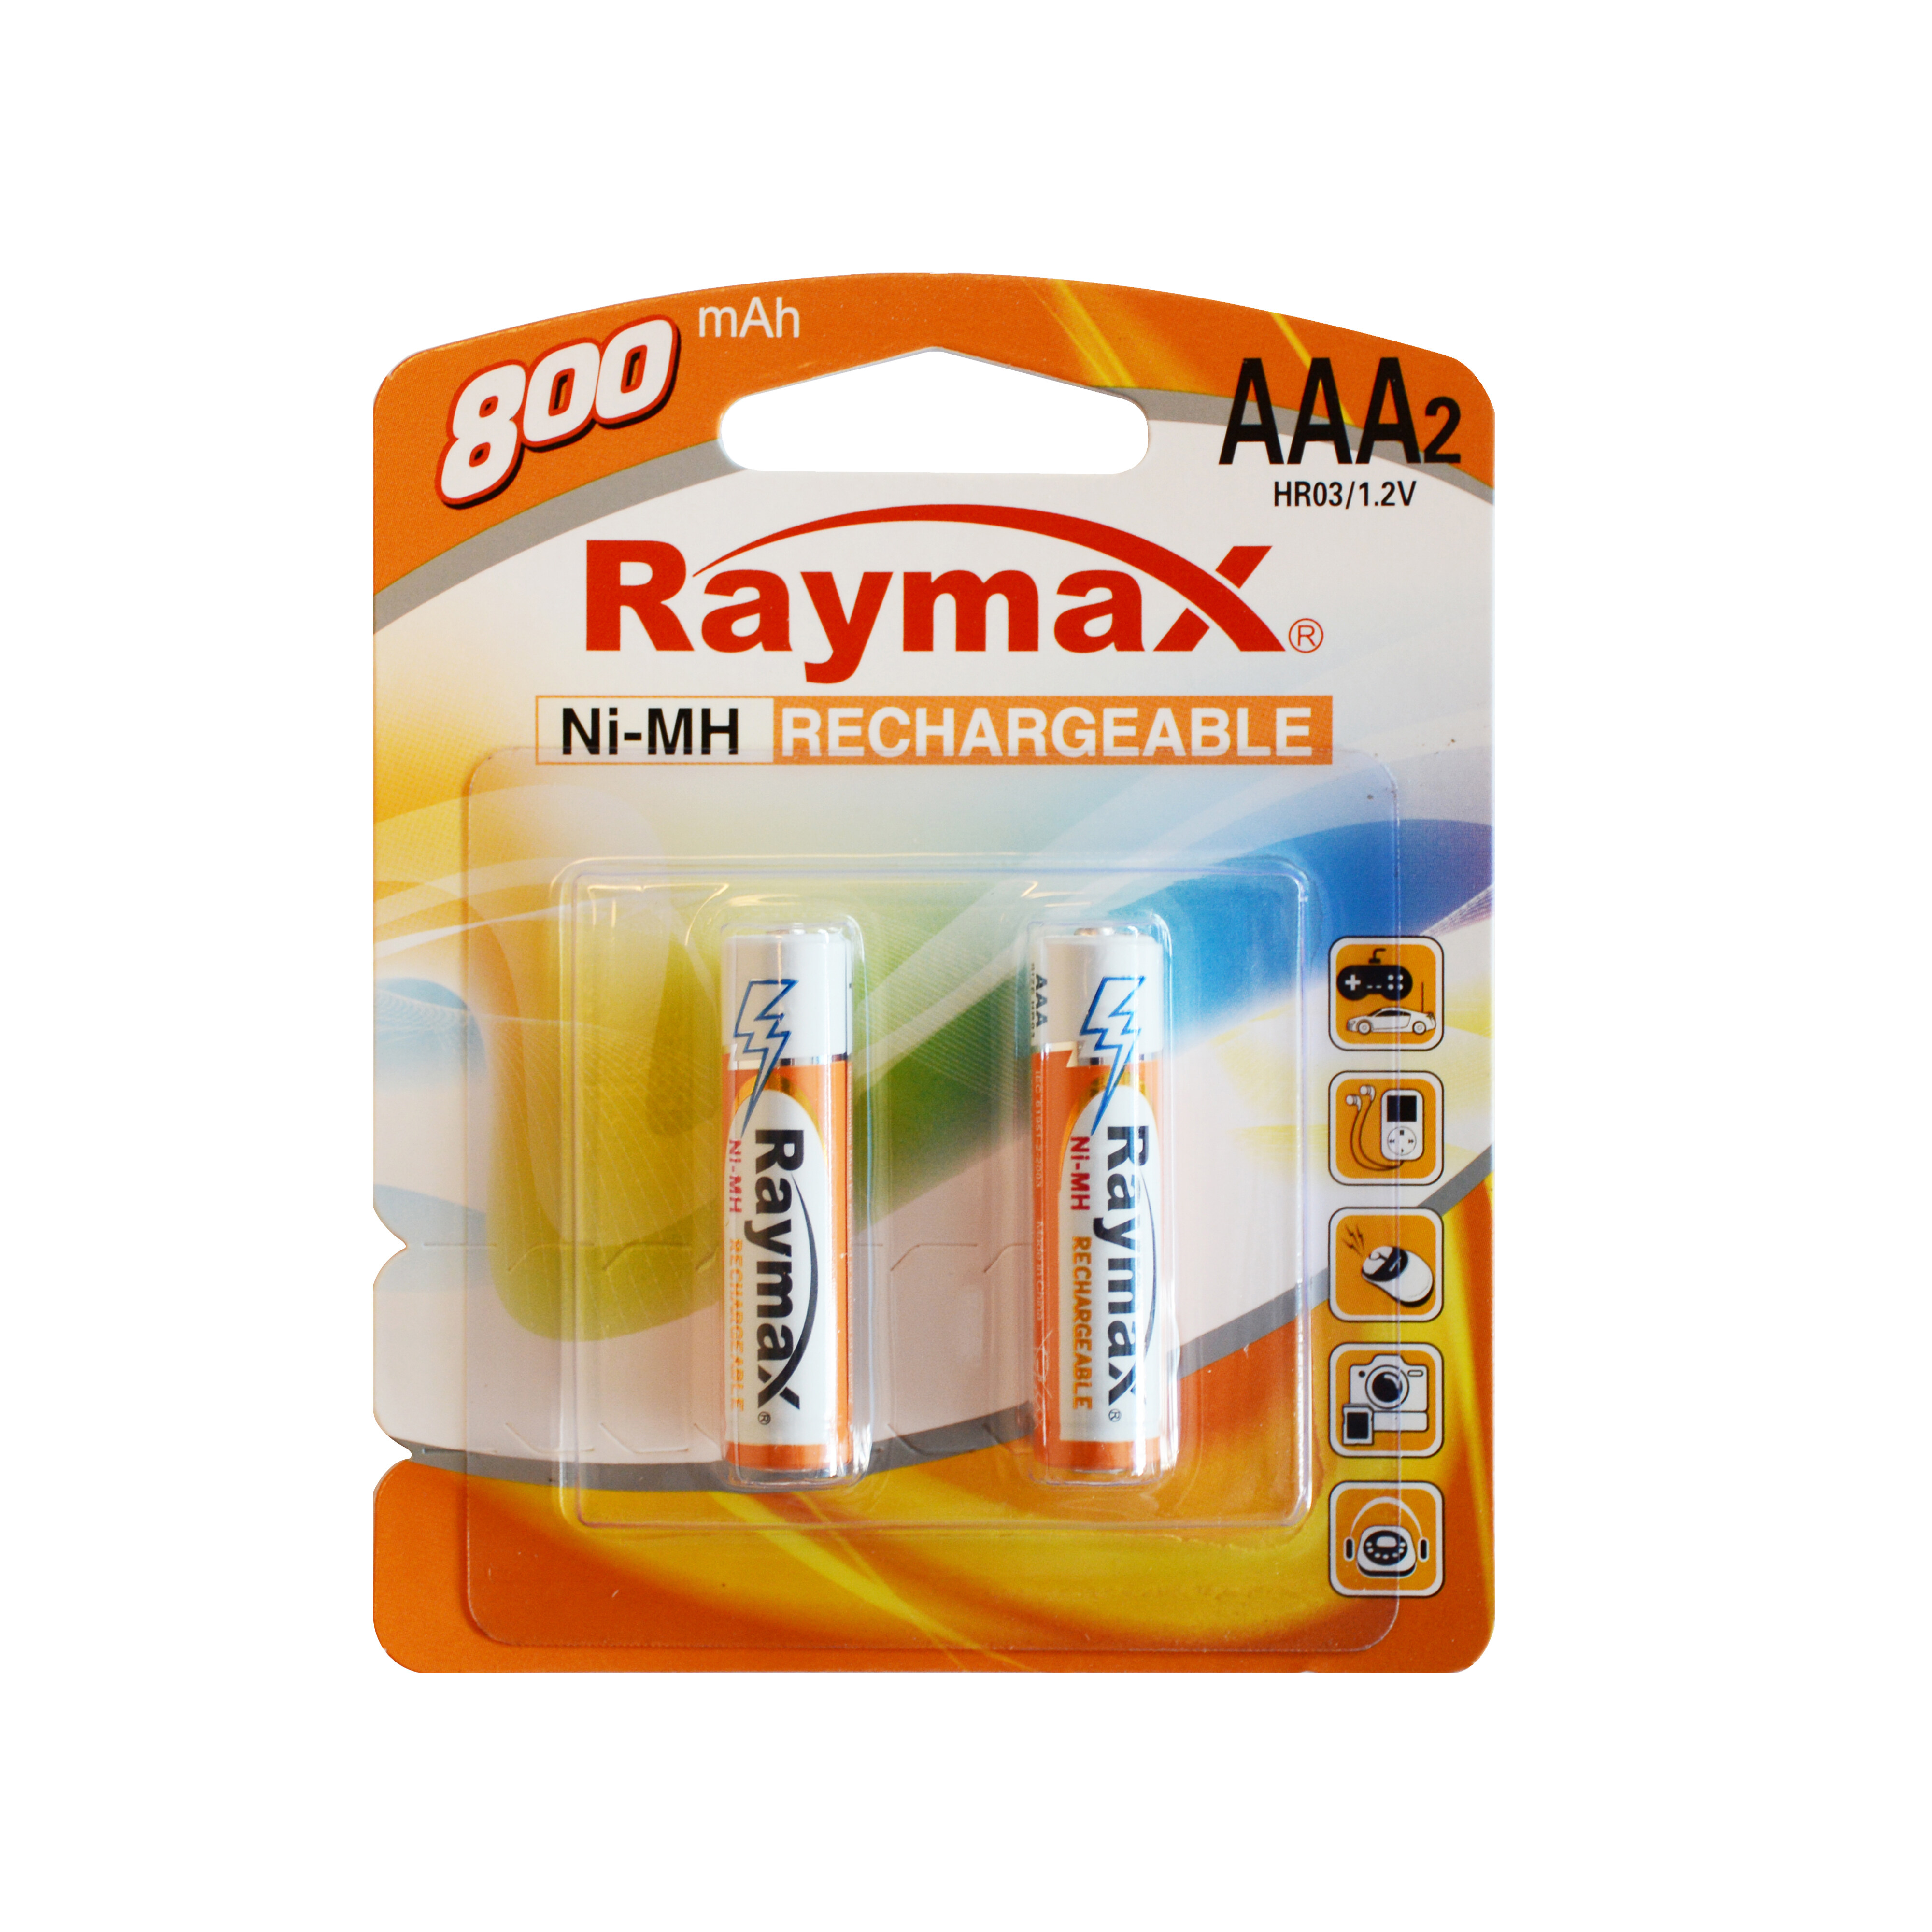 Raymax HR03 AAA 1.2v 800mAh NIMH rechargeable batteries- Recyle Use